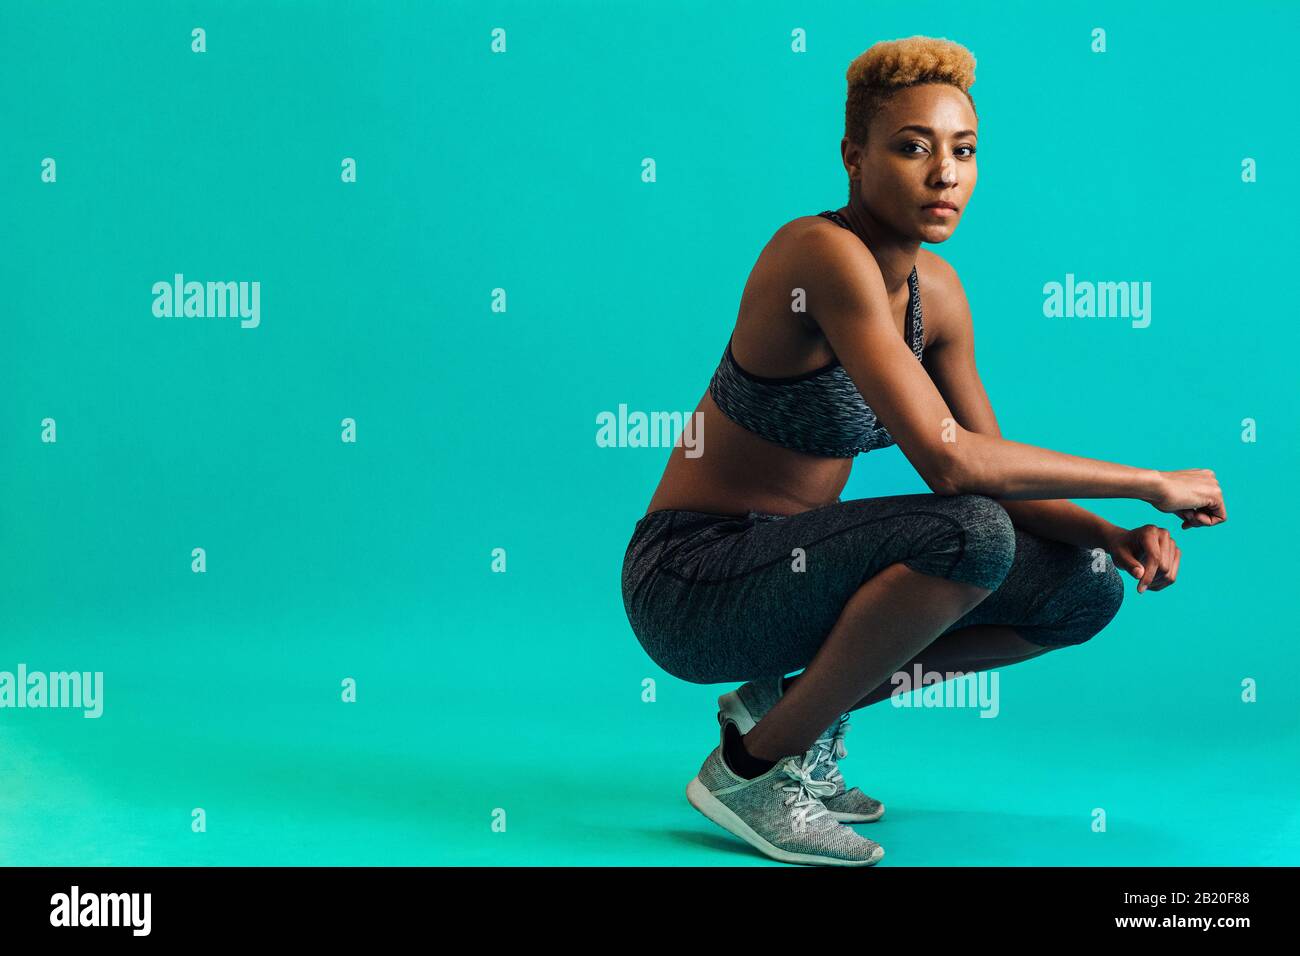 Portrait of a serious female athlete in sports bra and gym tights, squatting and looking at camera, against studio background Stock Photo